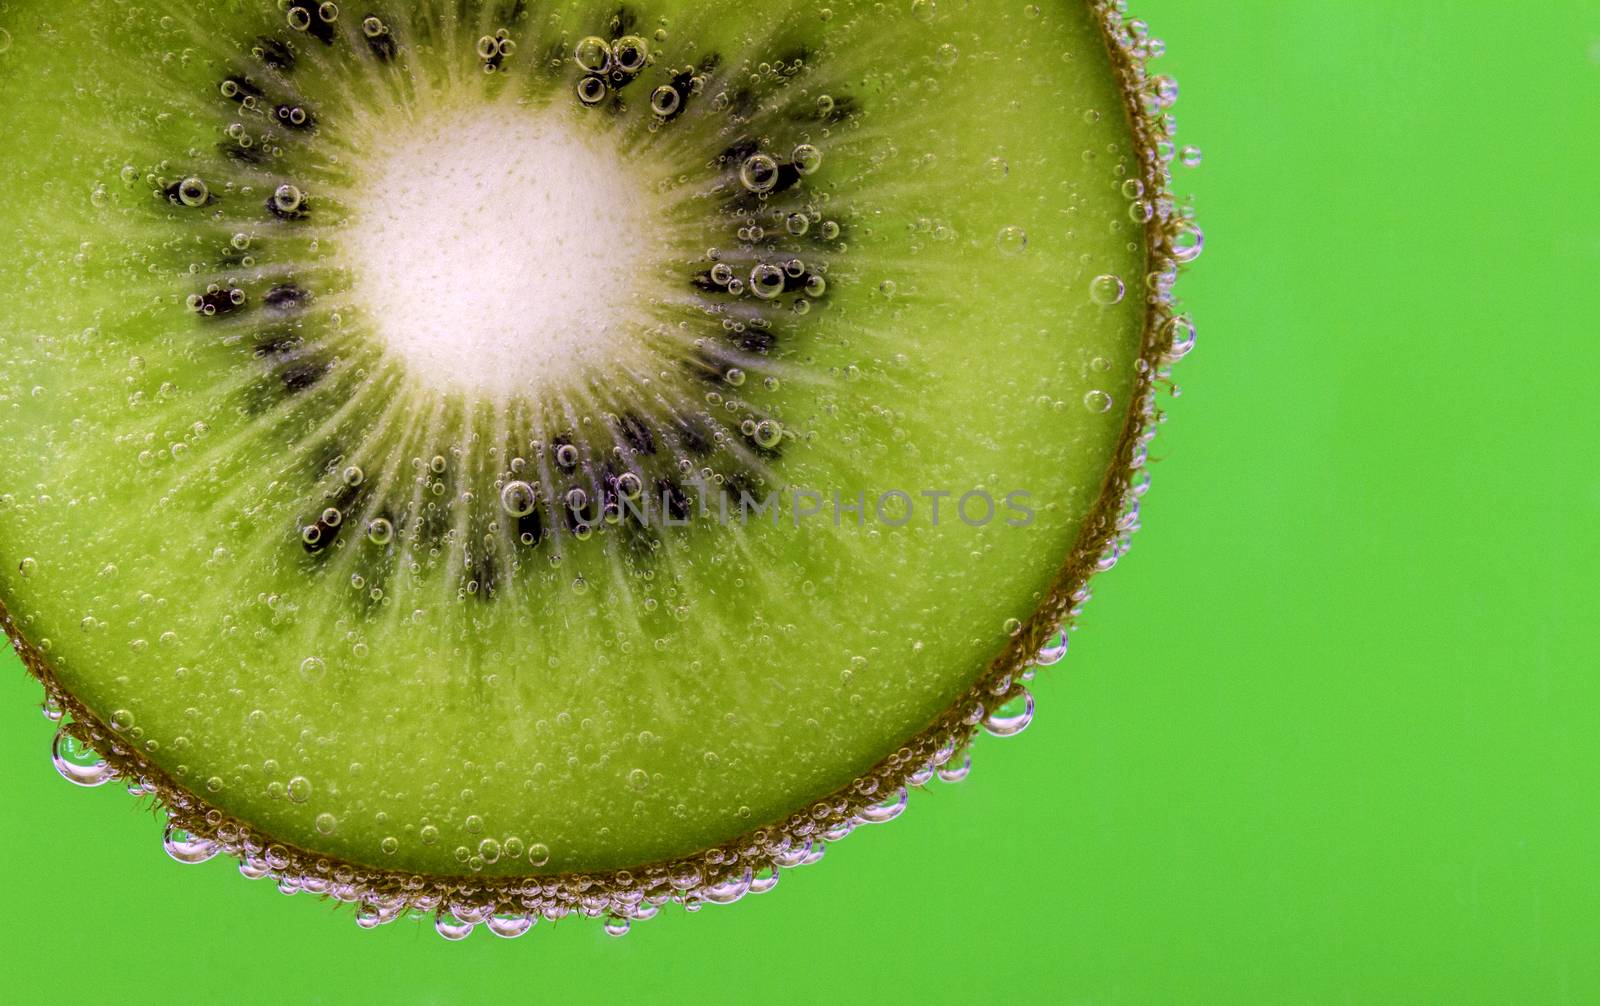 Closeup of a kiwi slice covered in water bubbles against a green background